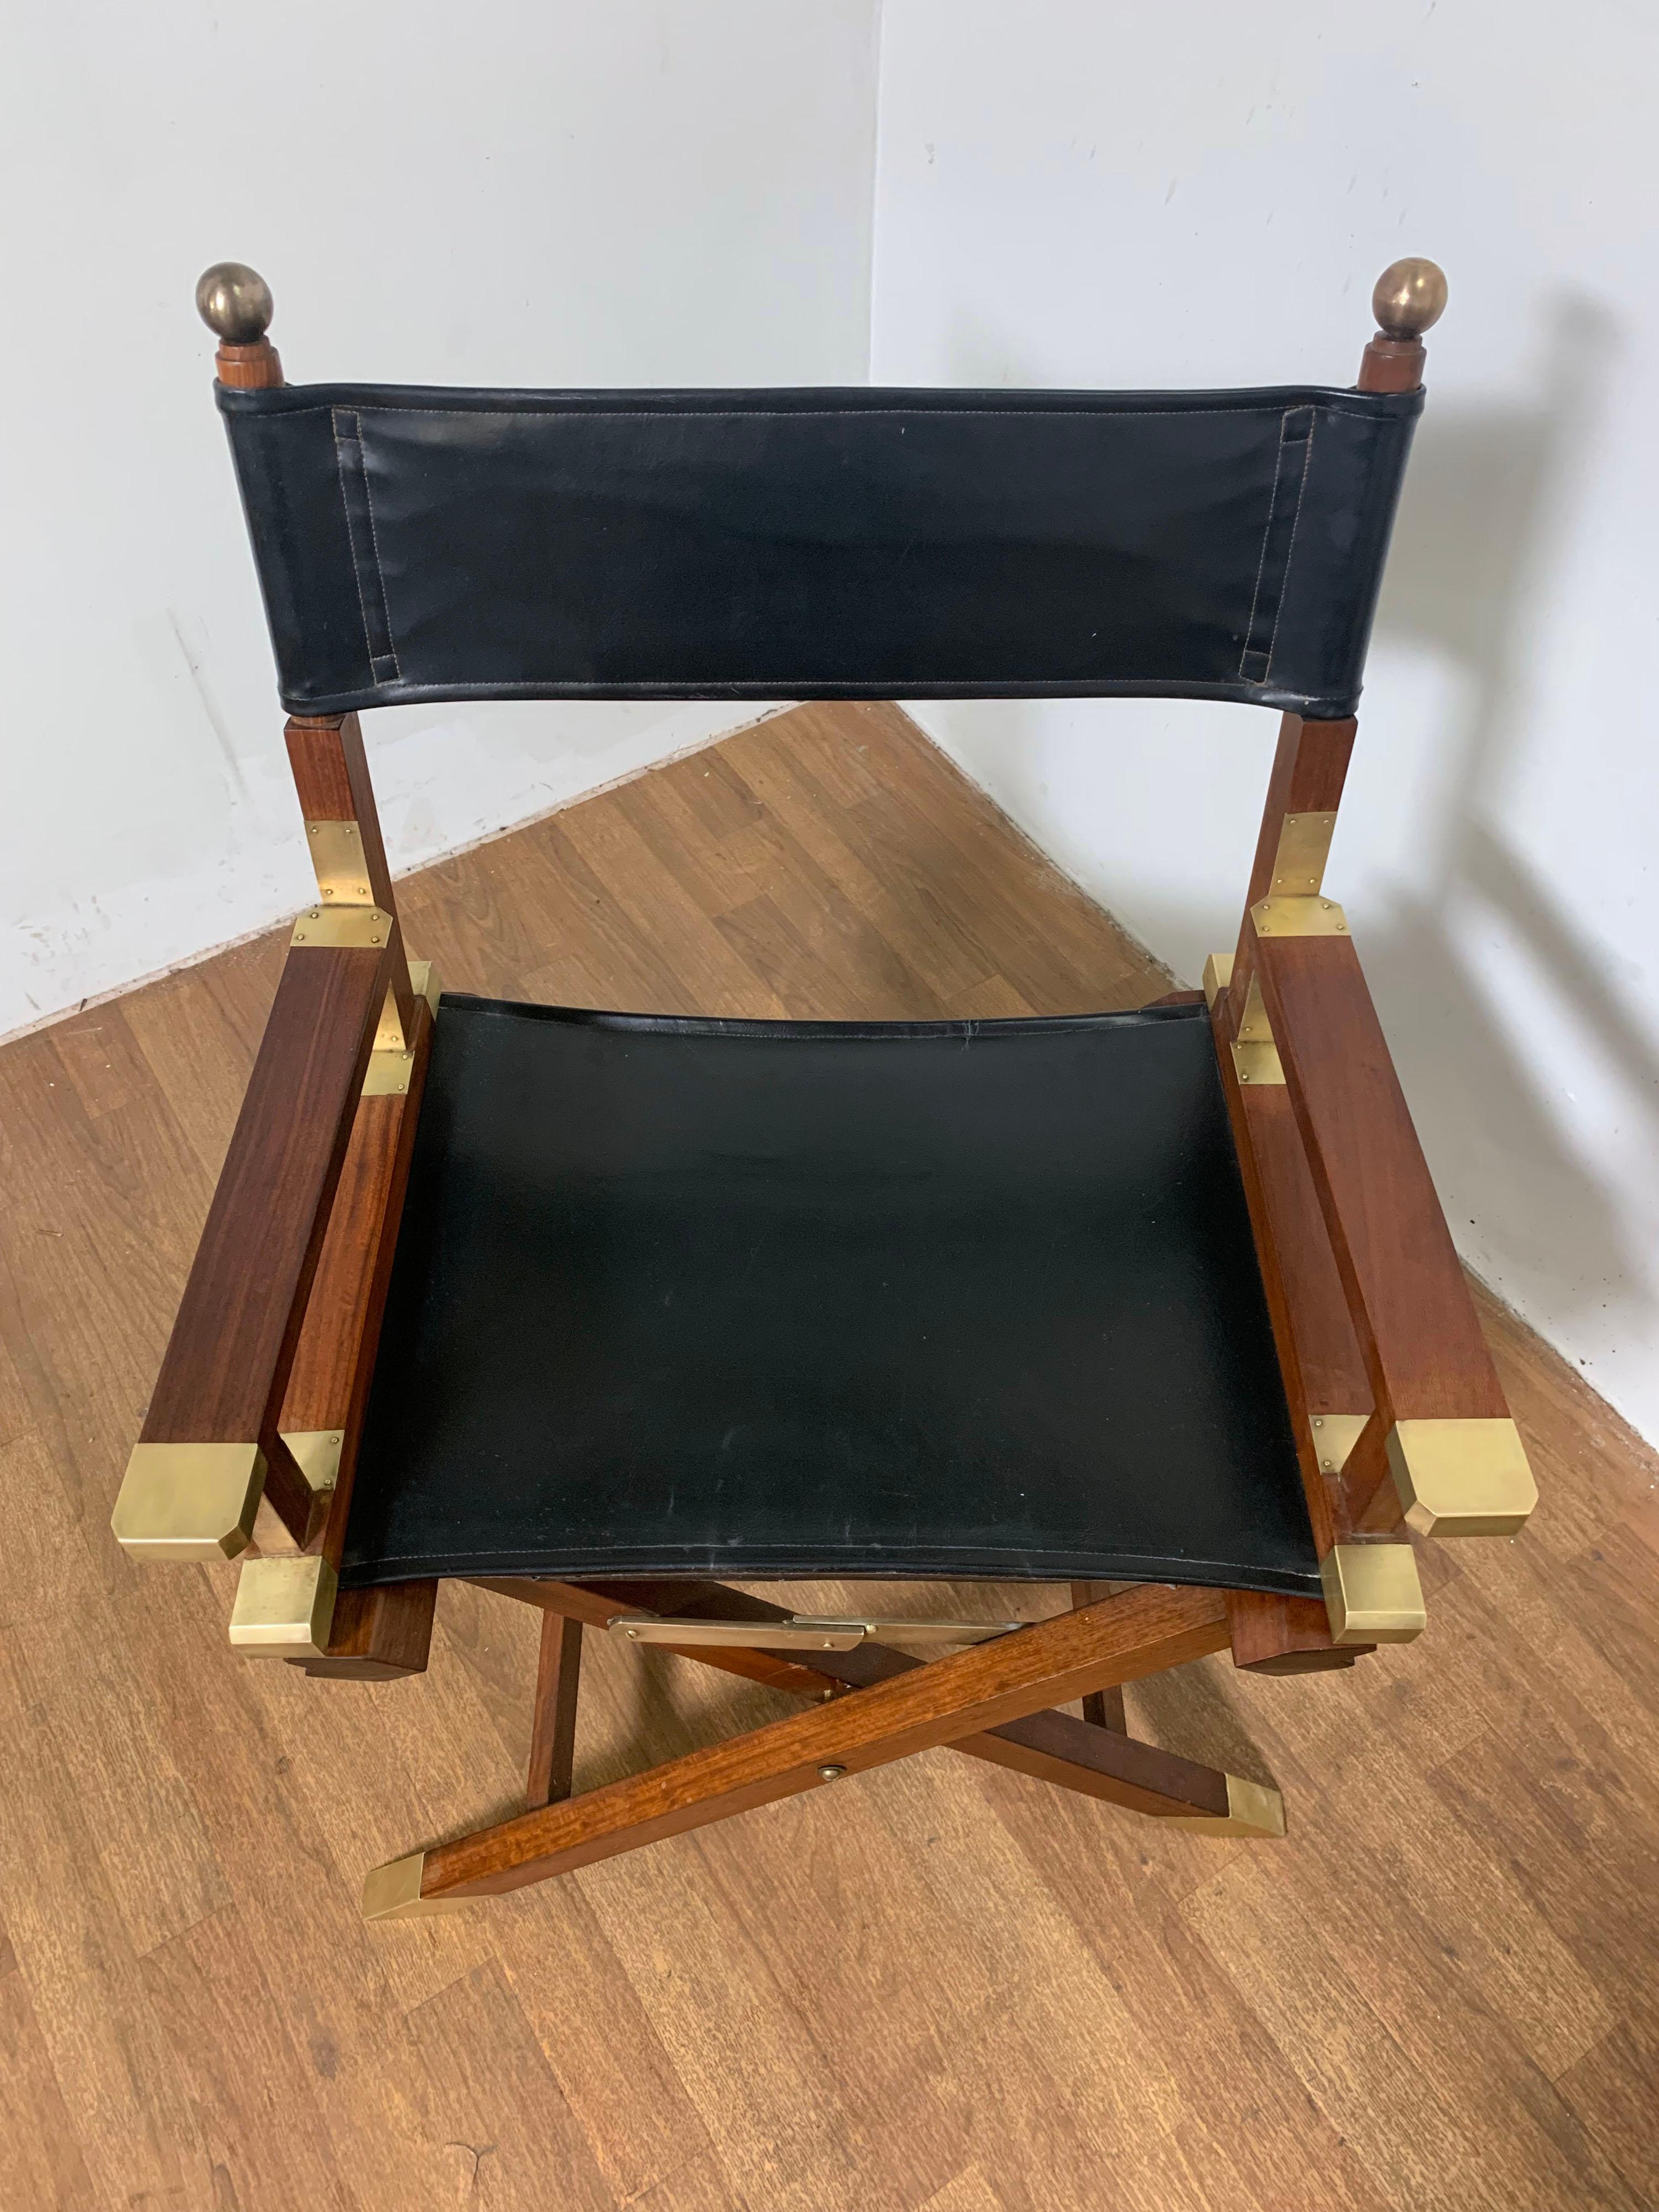 Pair of Bespoke Charlotte Horstmann Rosewood and Brass Campaign Chairs, C. 1950s For Sale 5